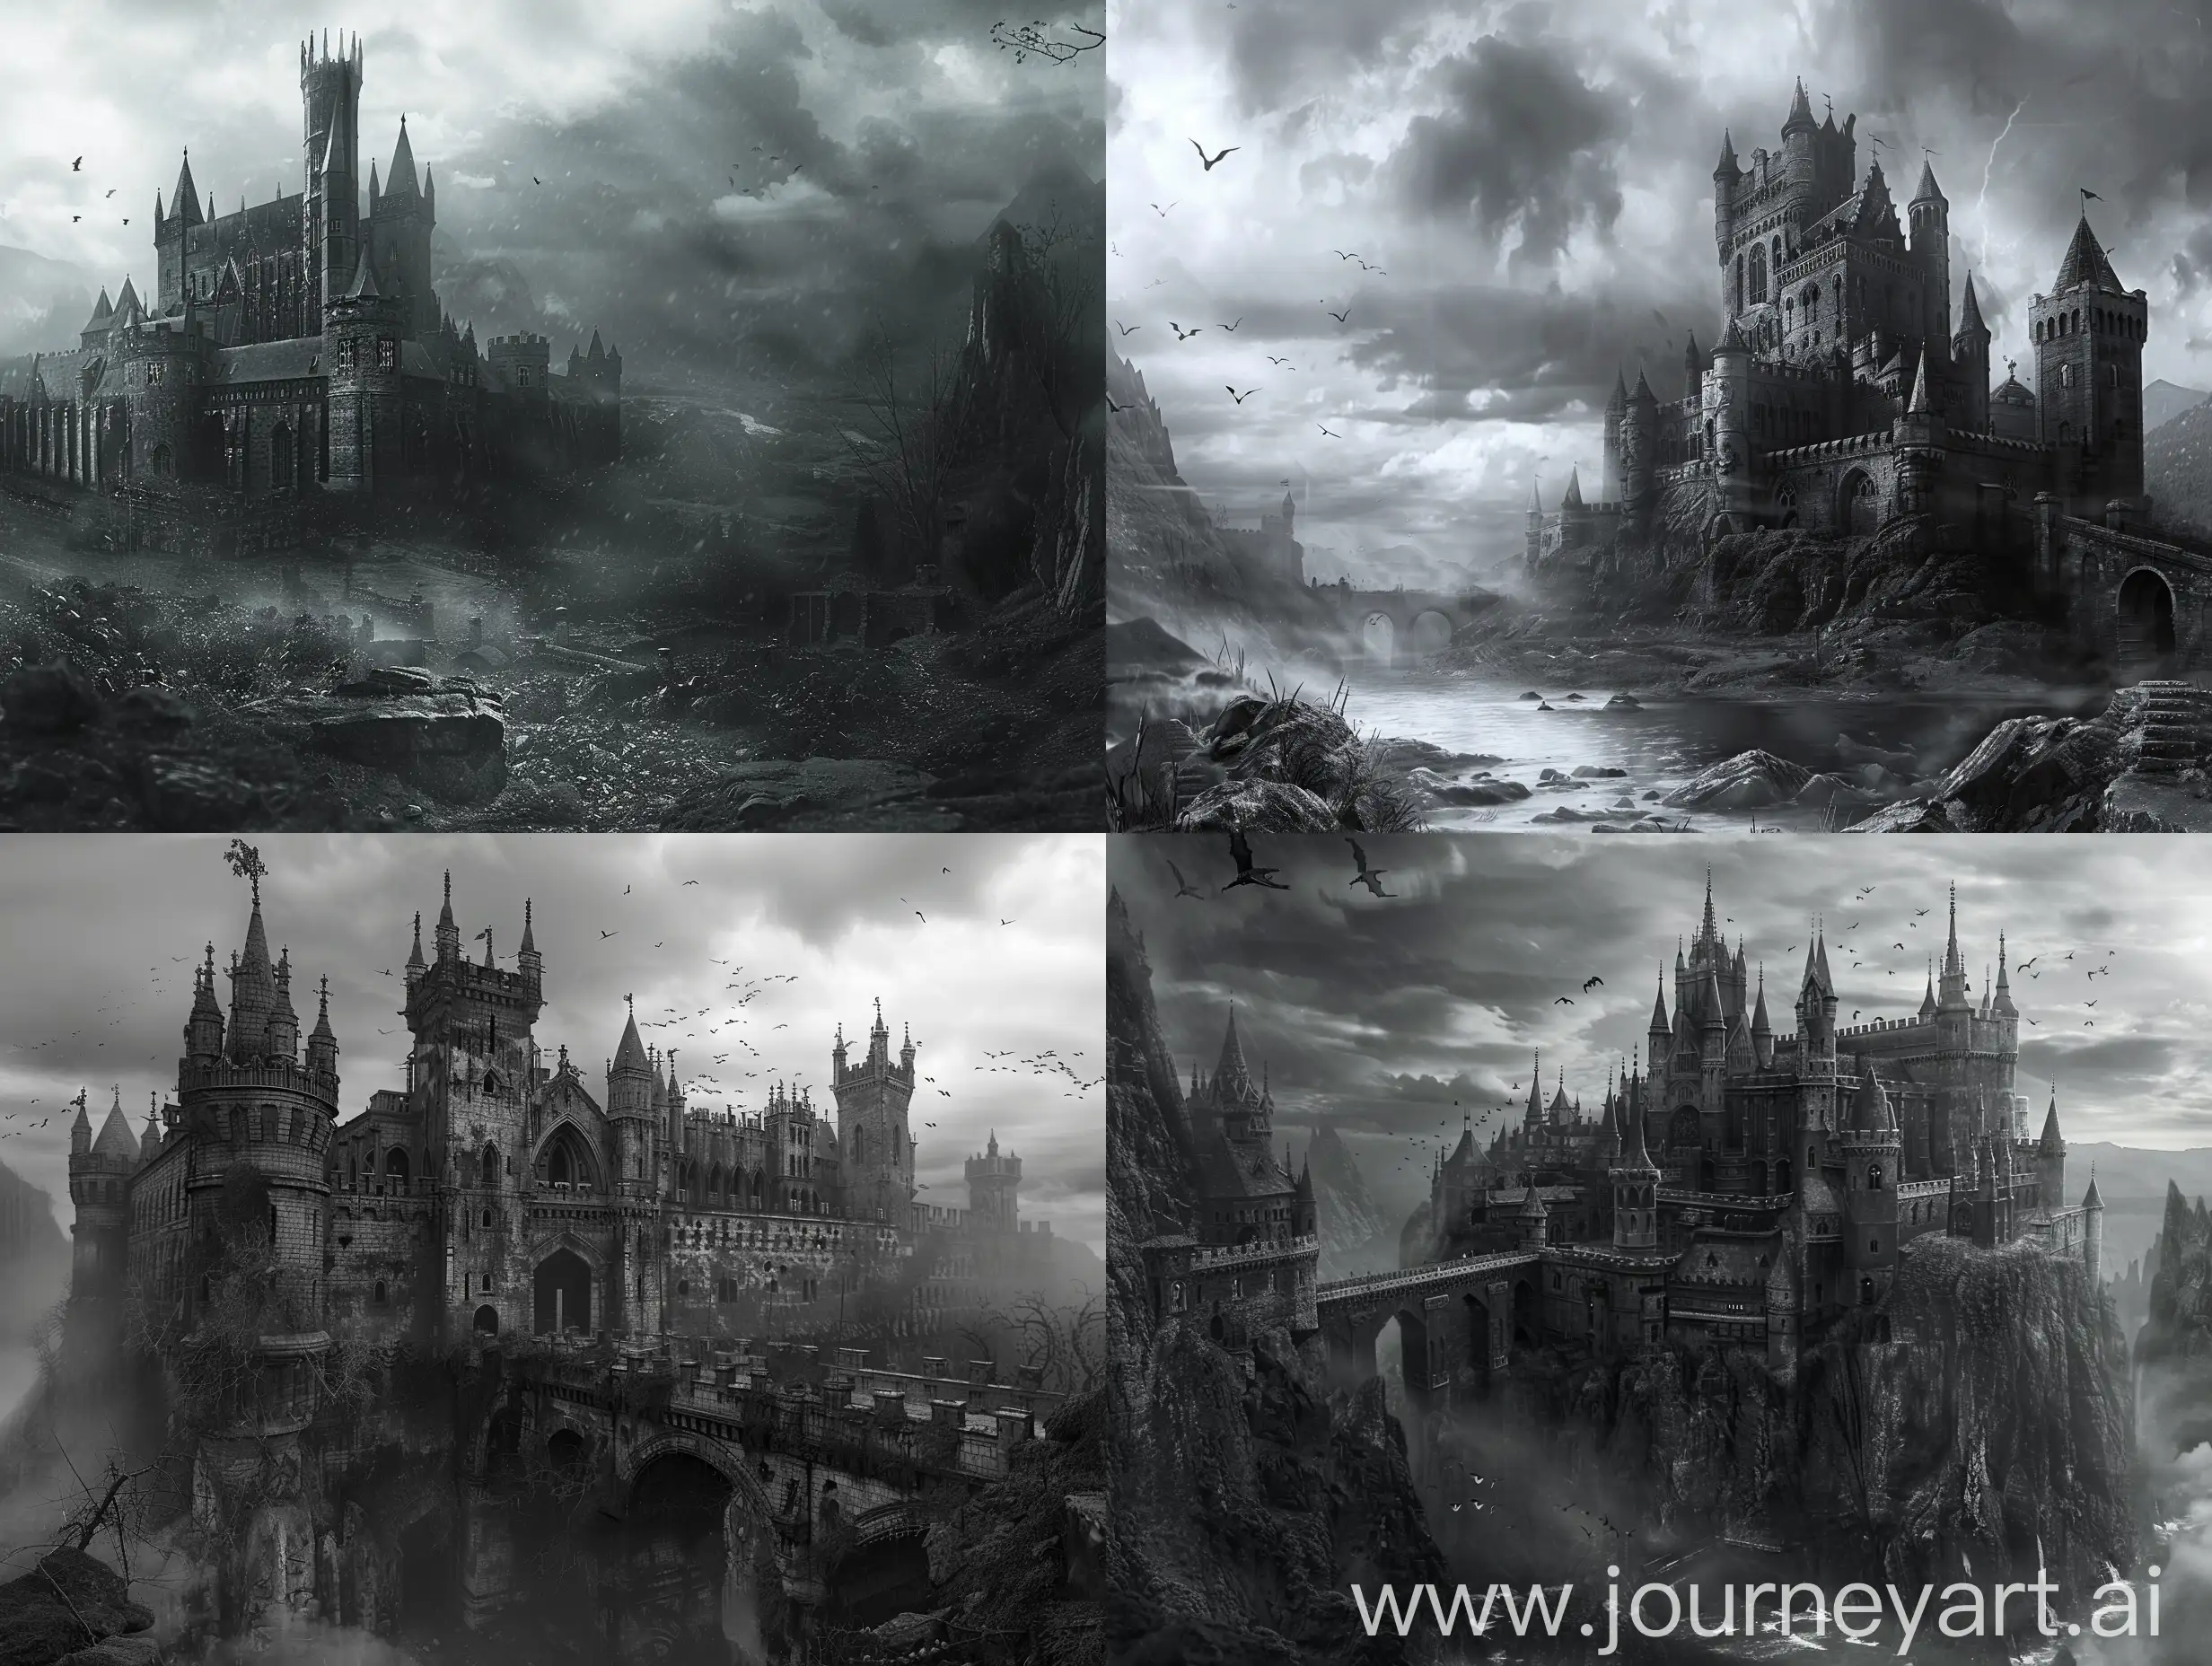 Hyperrealistic-Gothic-Castle-Illustration-in-Monochrome-Style